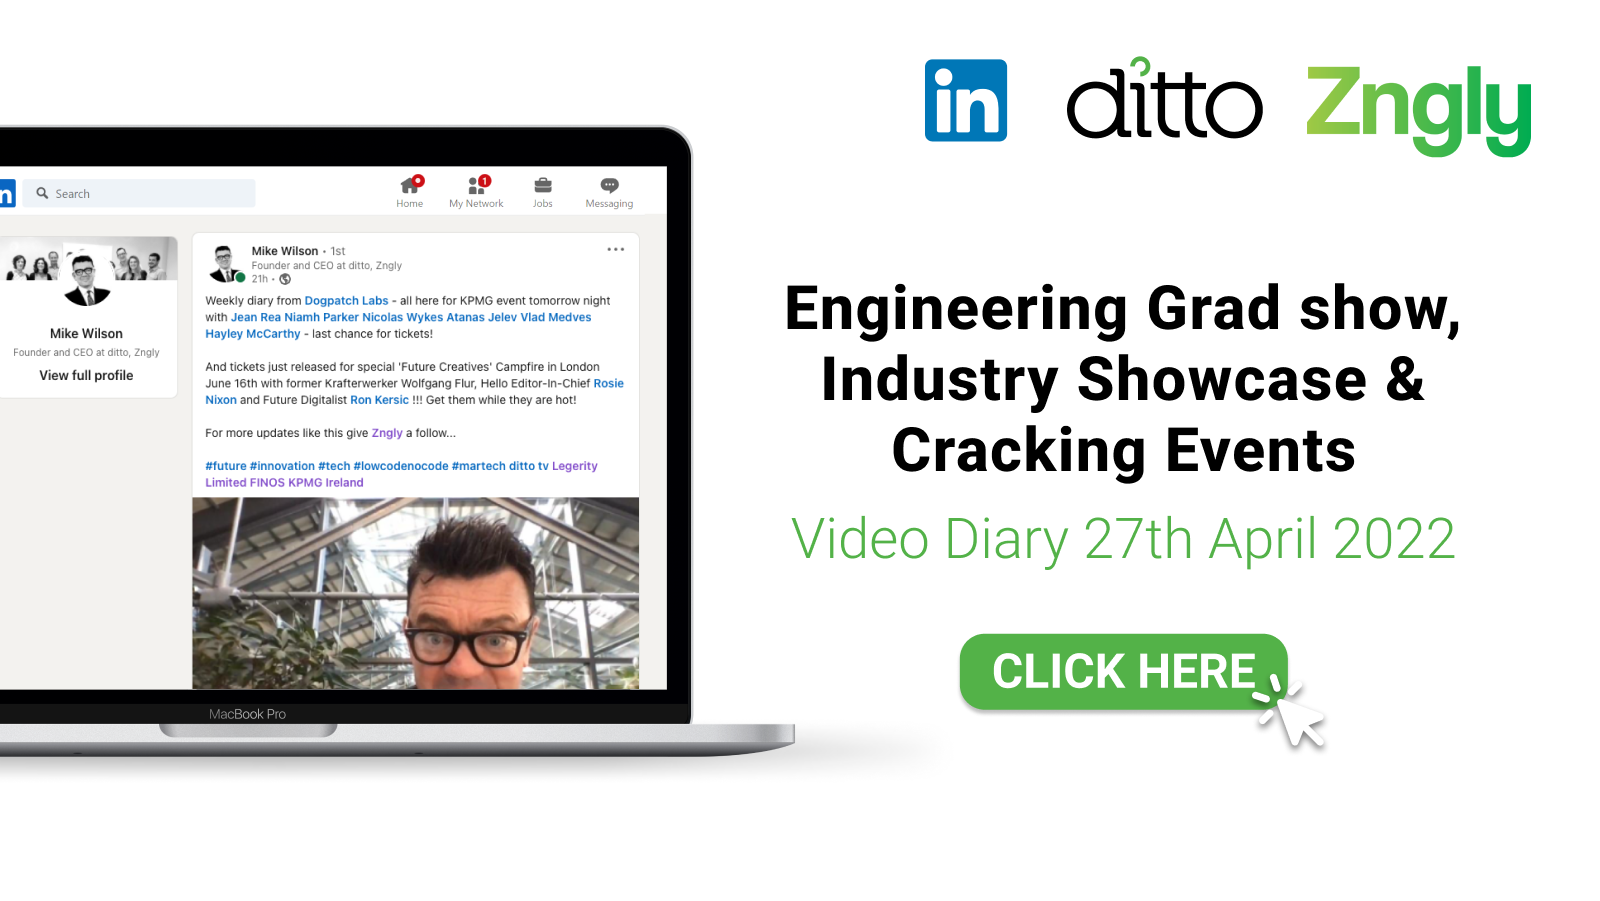 Video Diary: Engineering Grad show, Industry Showcase & Cracking Events